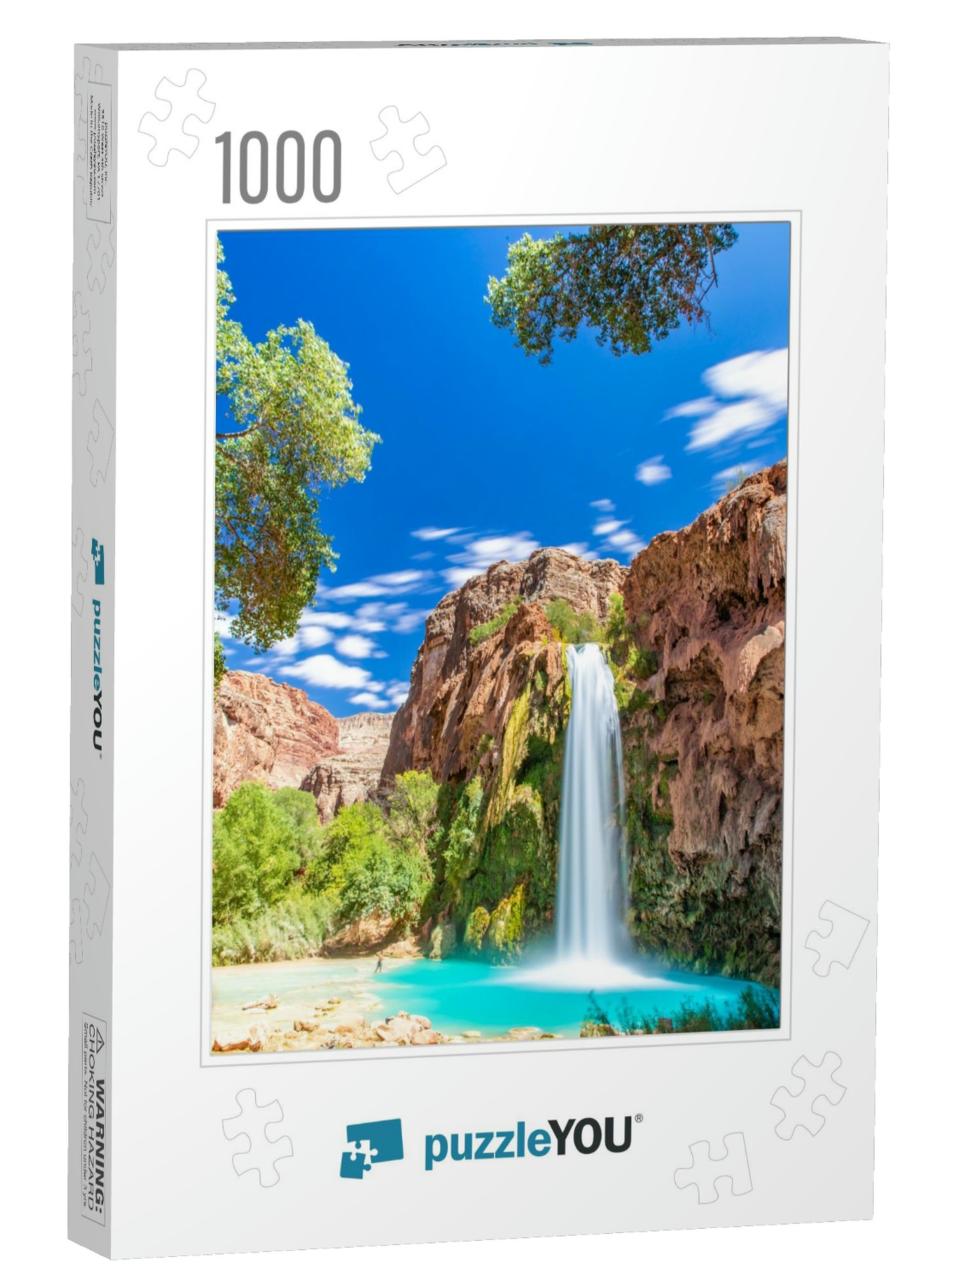 Long Exposure Photo At Havasupai Waterfalls During Summer... Jigsaw Puzzle with 1000 pieces